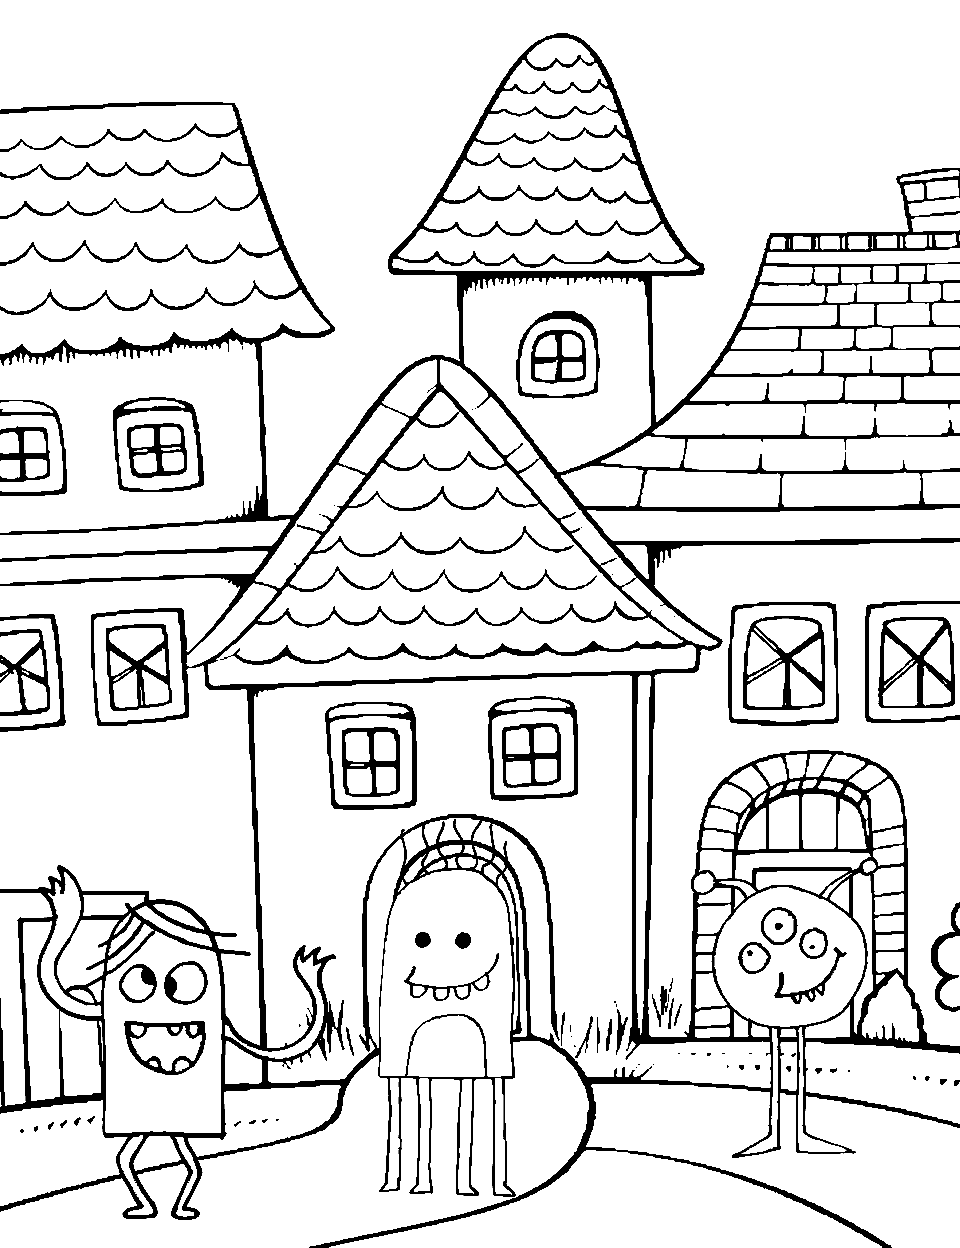 Halloween Monster Parade Coloring Page - Various monsters joyfully parading down a street during Halloween.